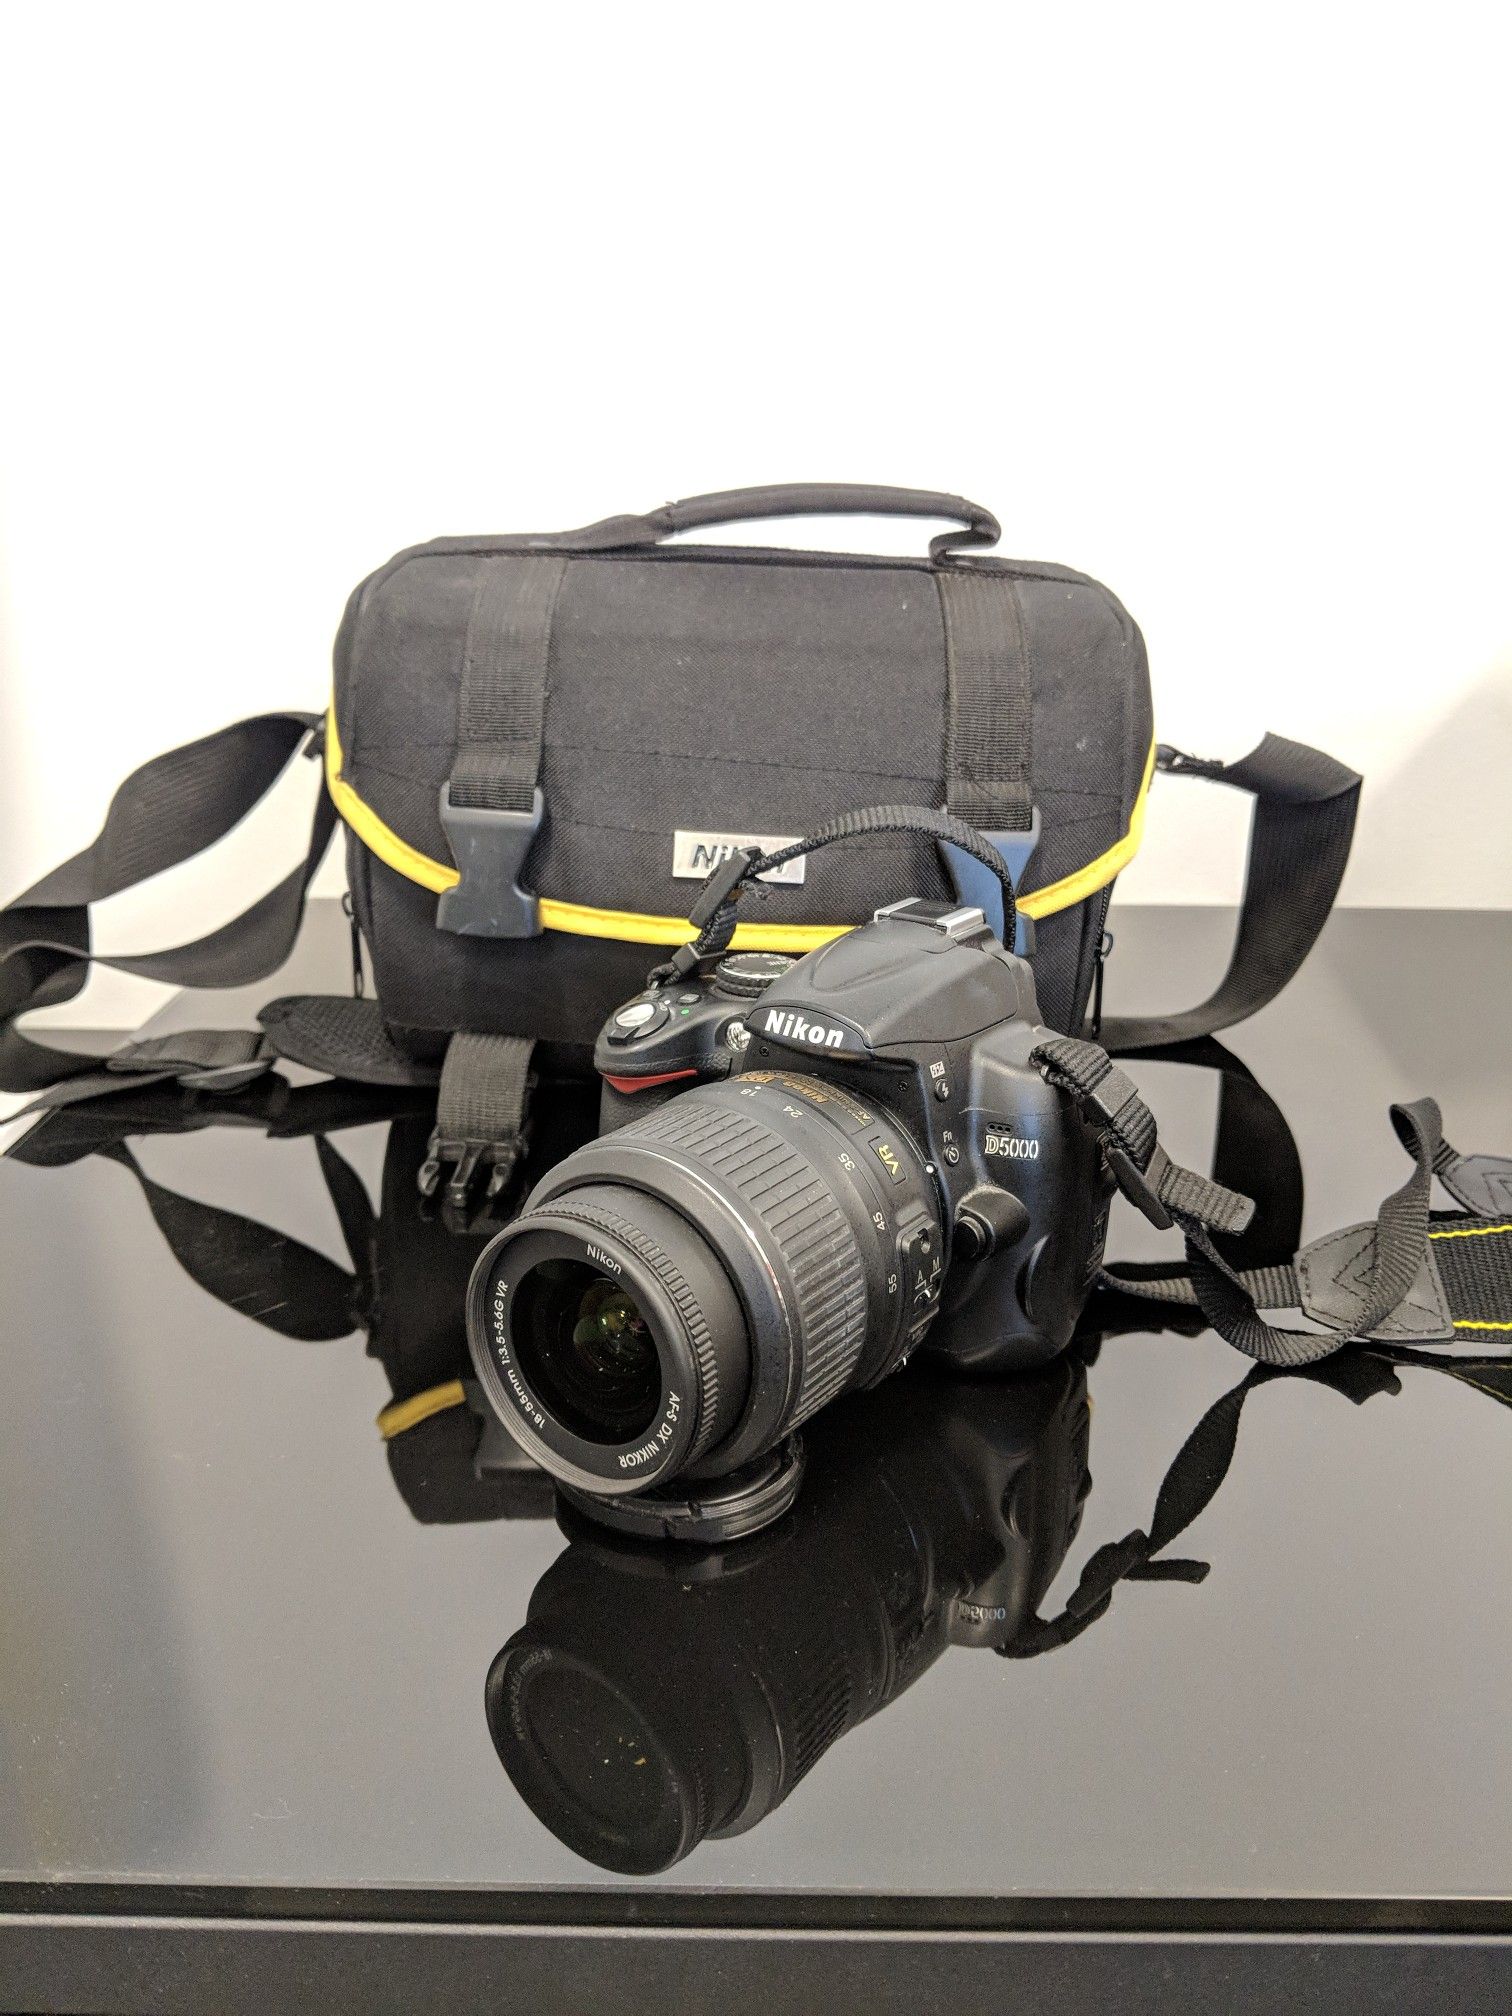 Nikon D5000 with 18-55mm Len and Travel Bag